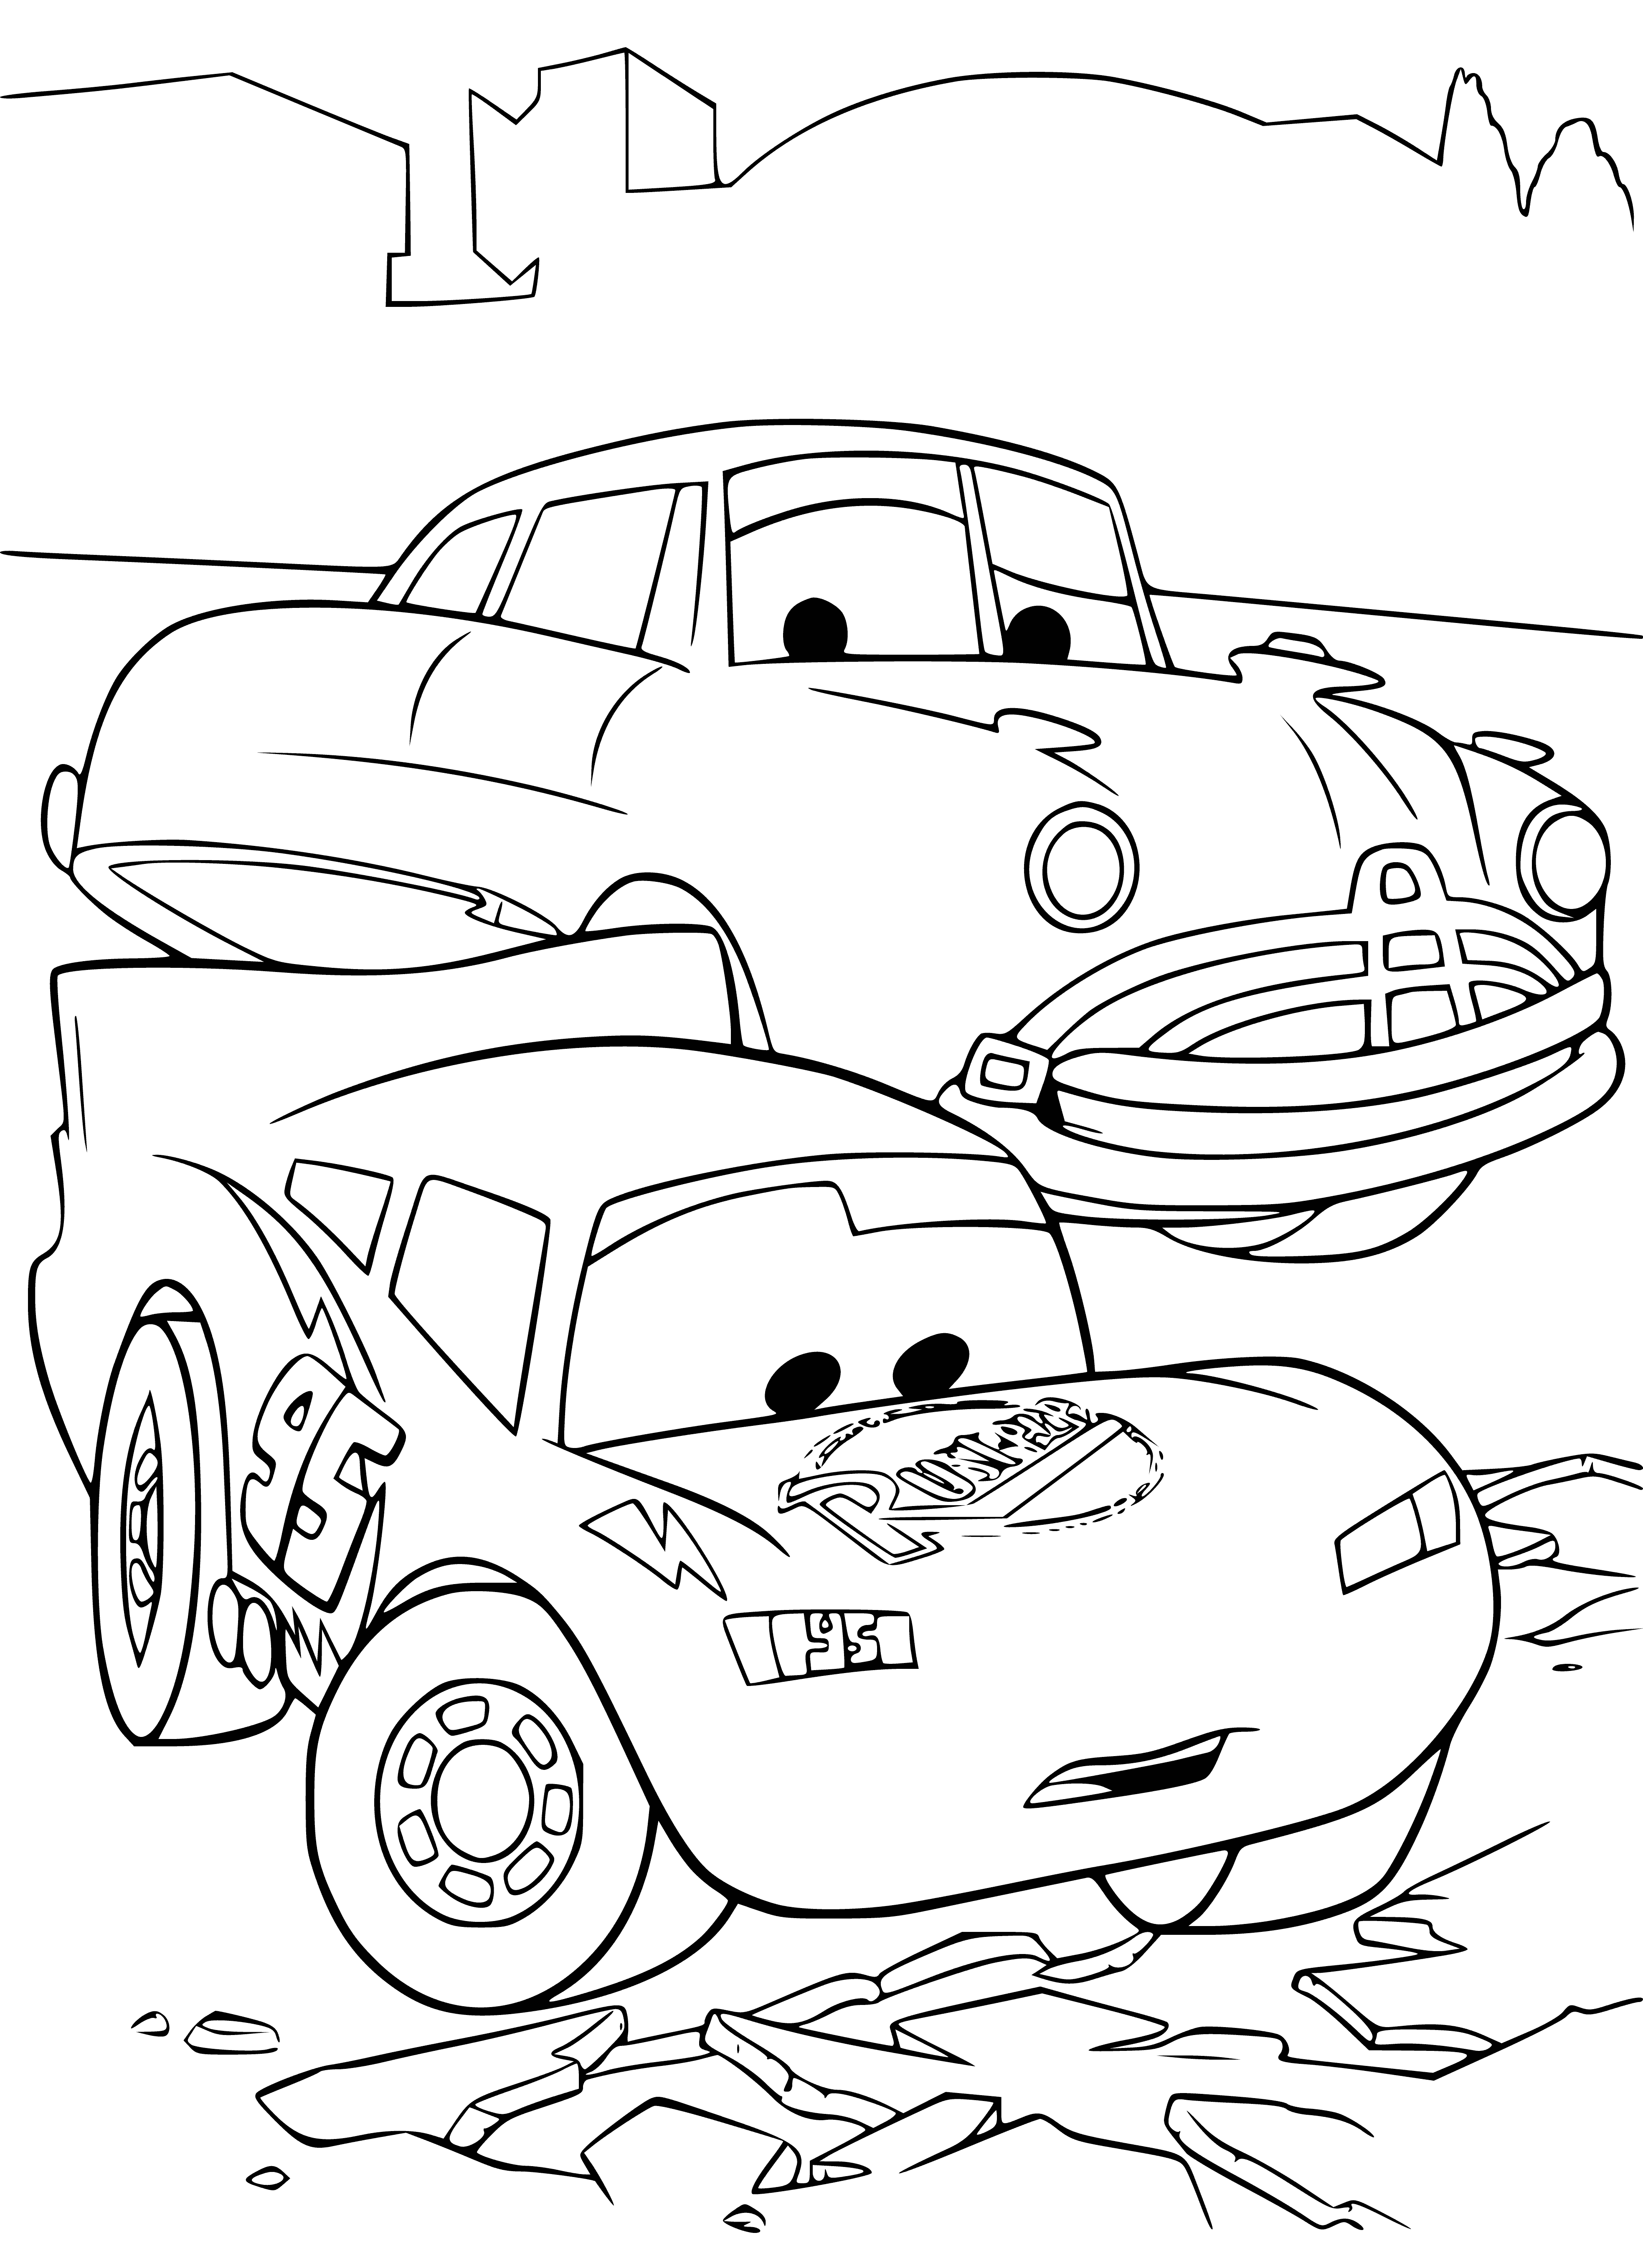 coloring page: Two cars drive side-by-side, each with flames of different colors.